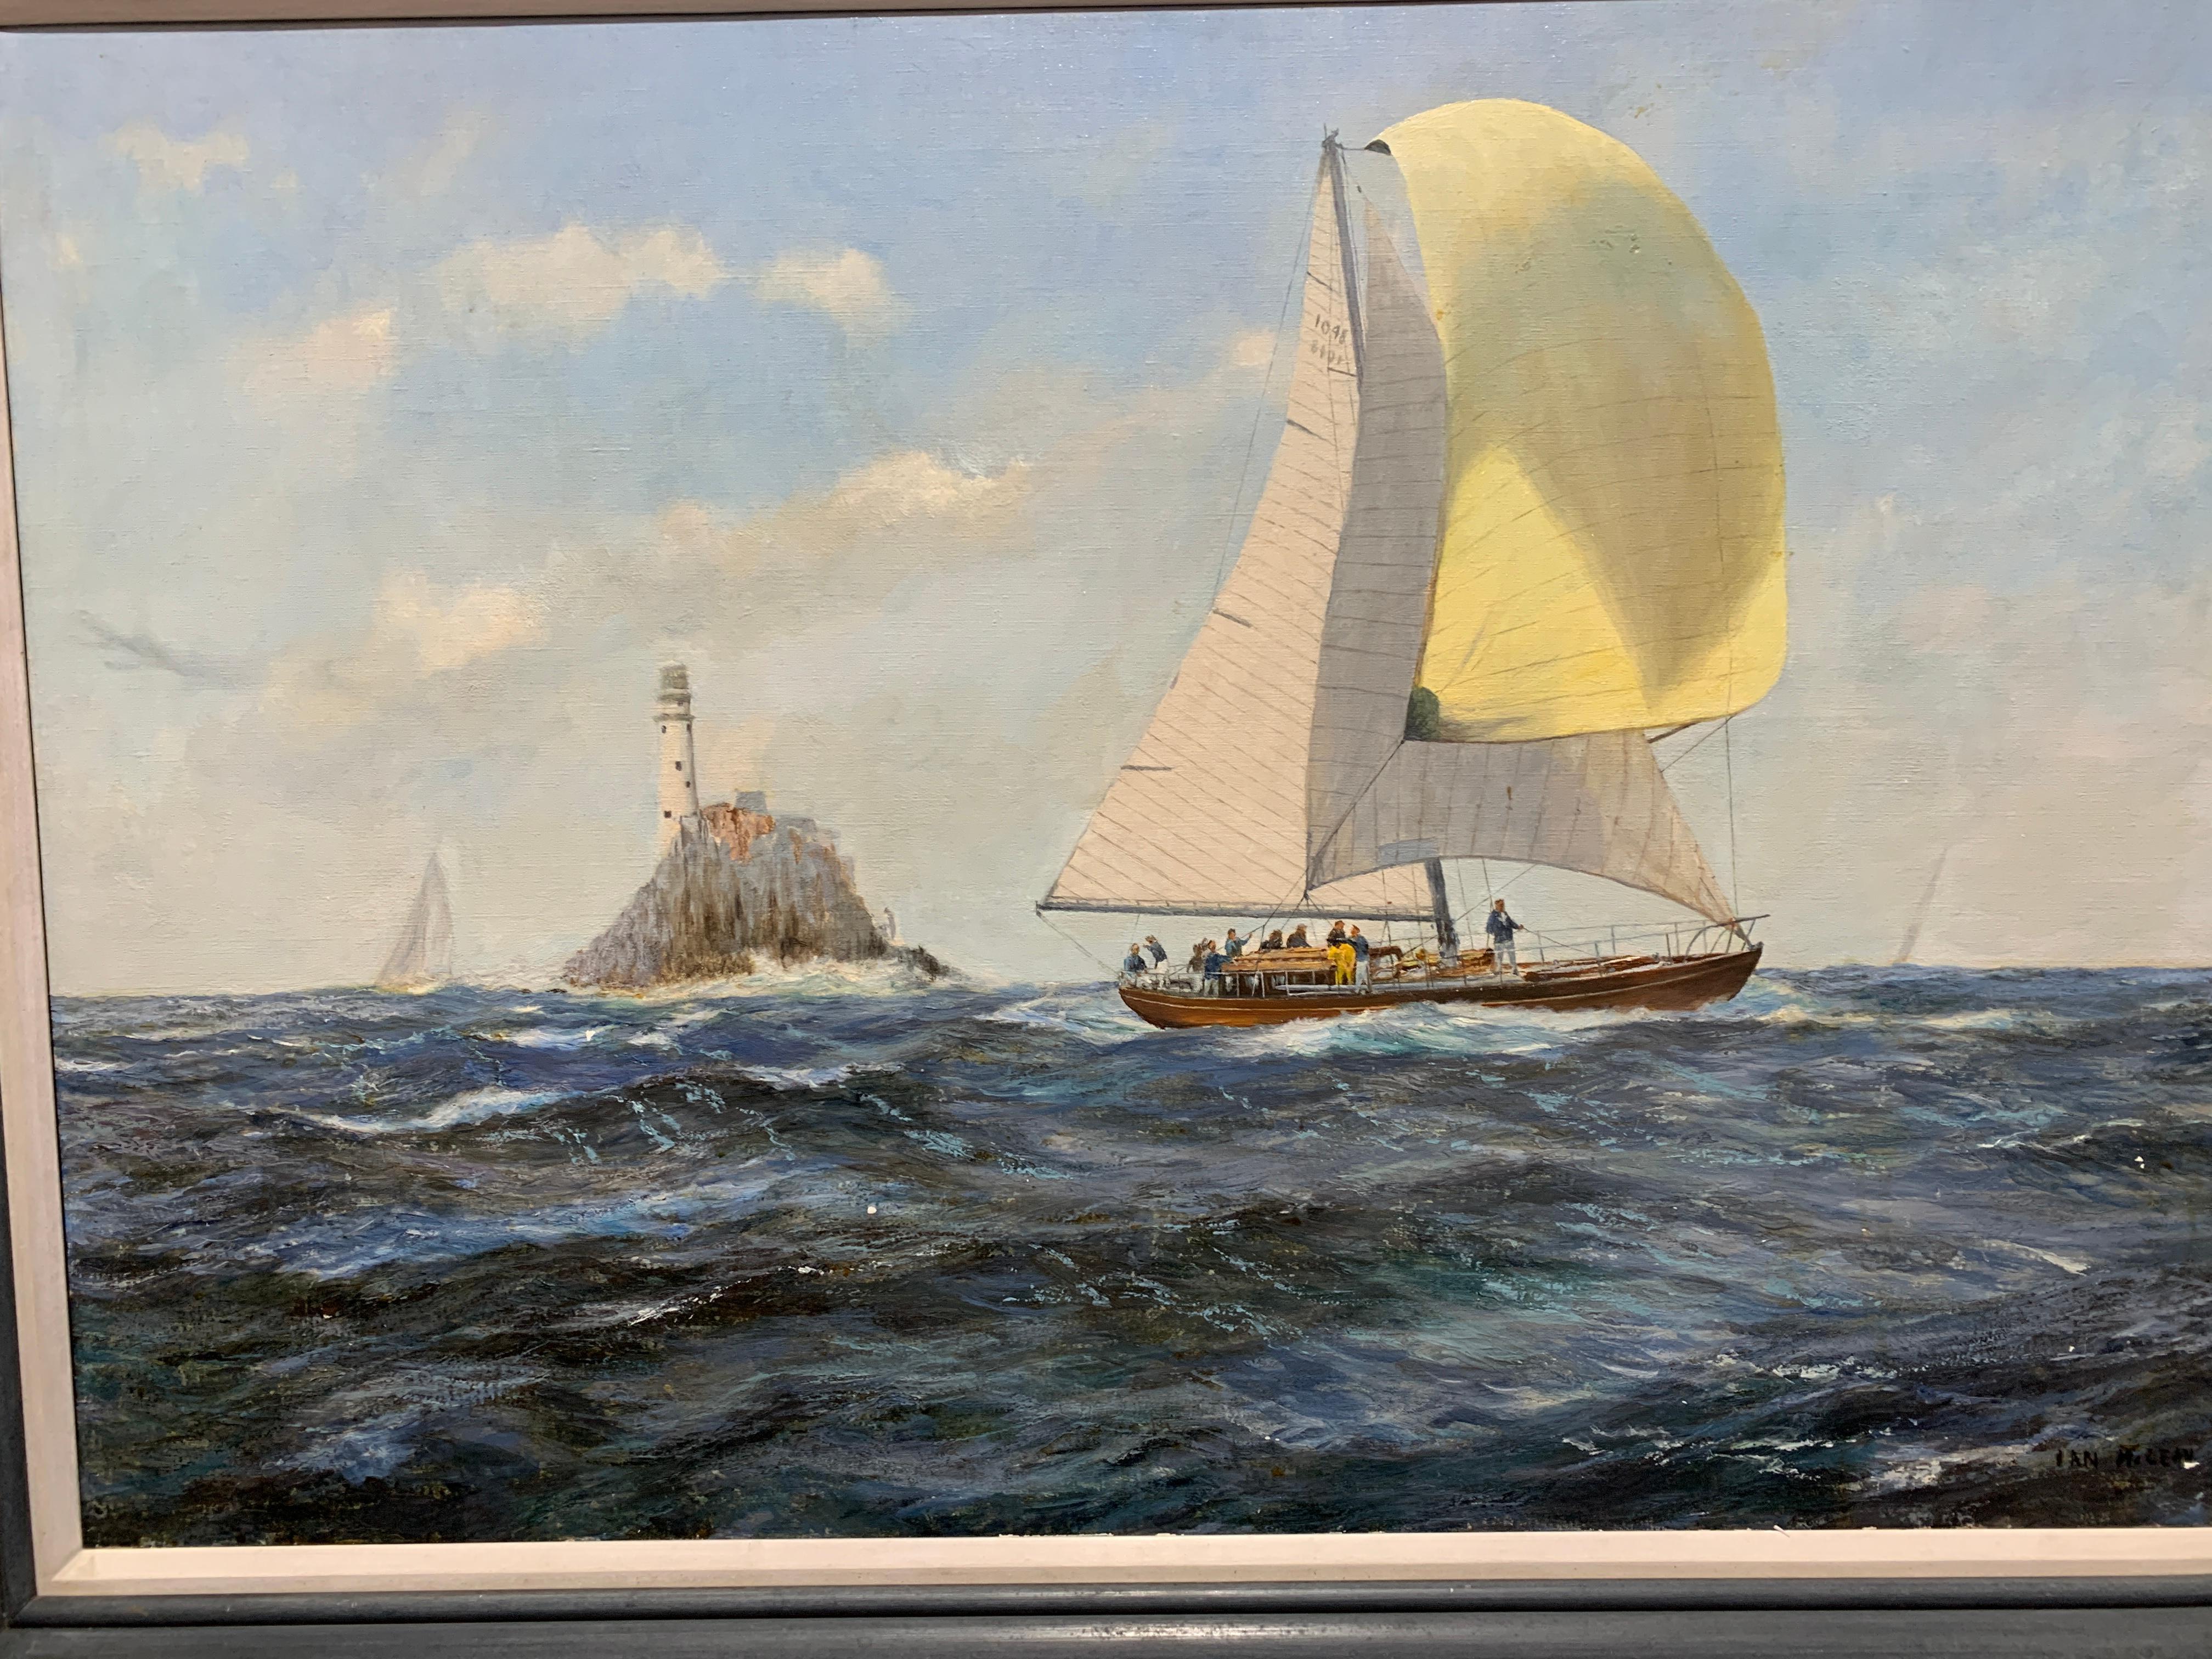 English 20th century Yacht racing off the the Fast Lighthouse of Ireland. - Painting by Ian Mclean